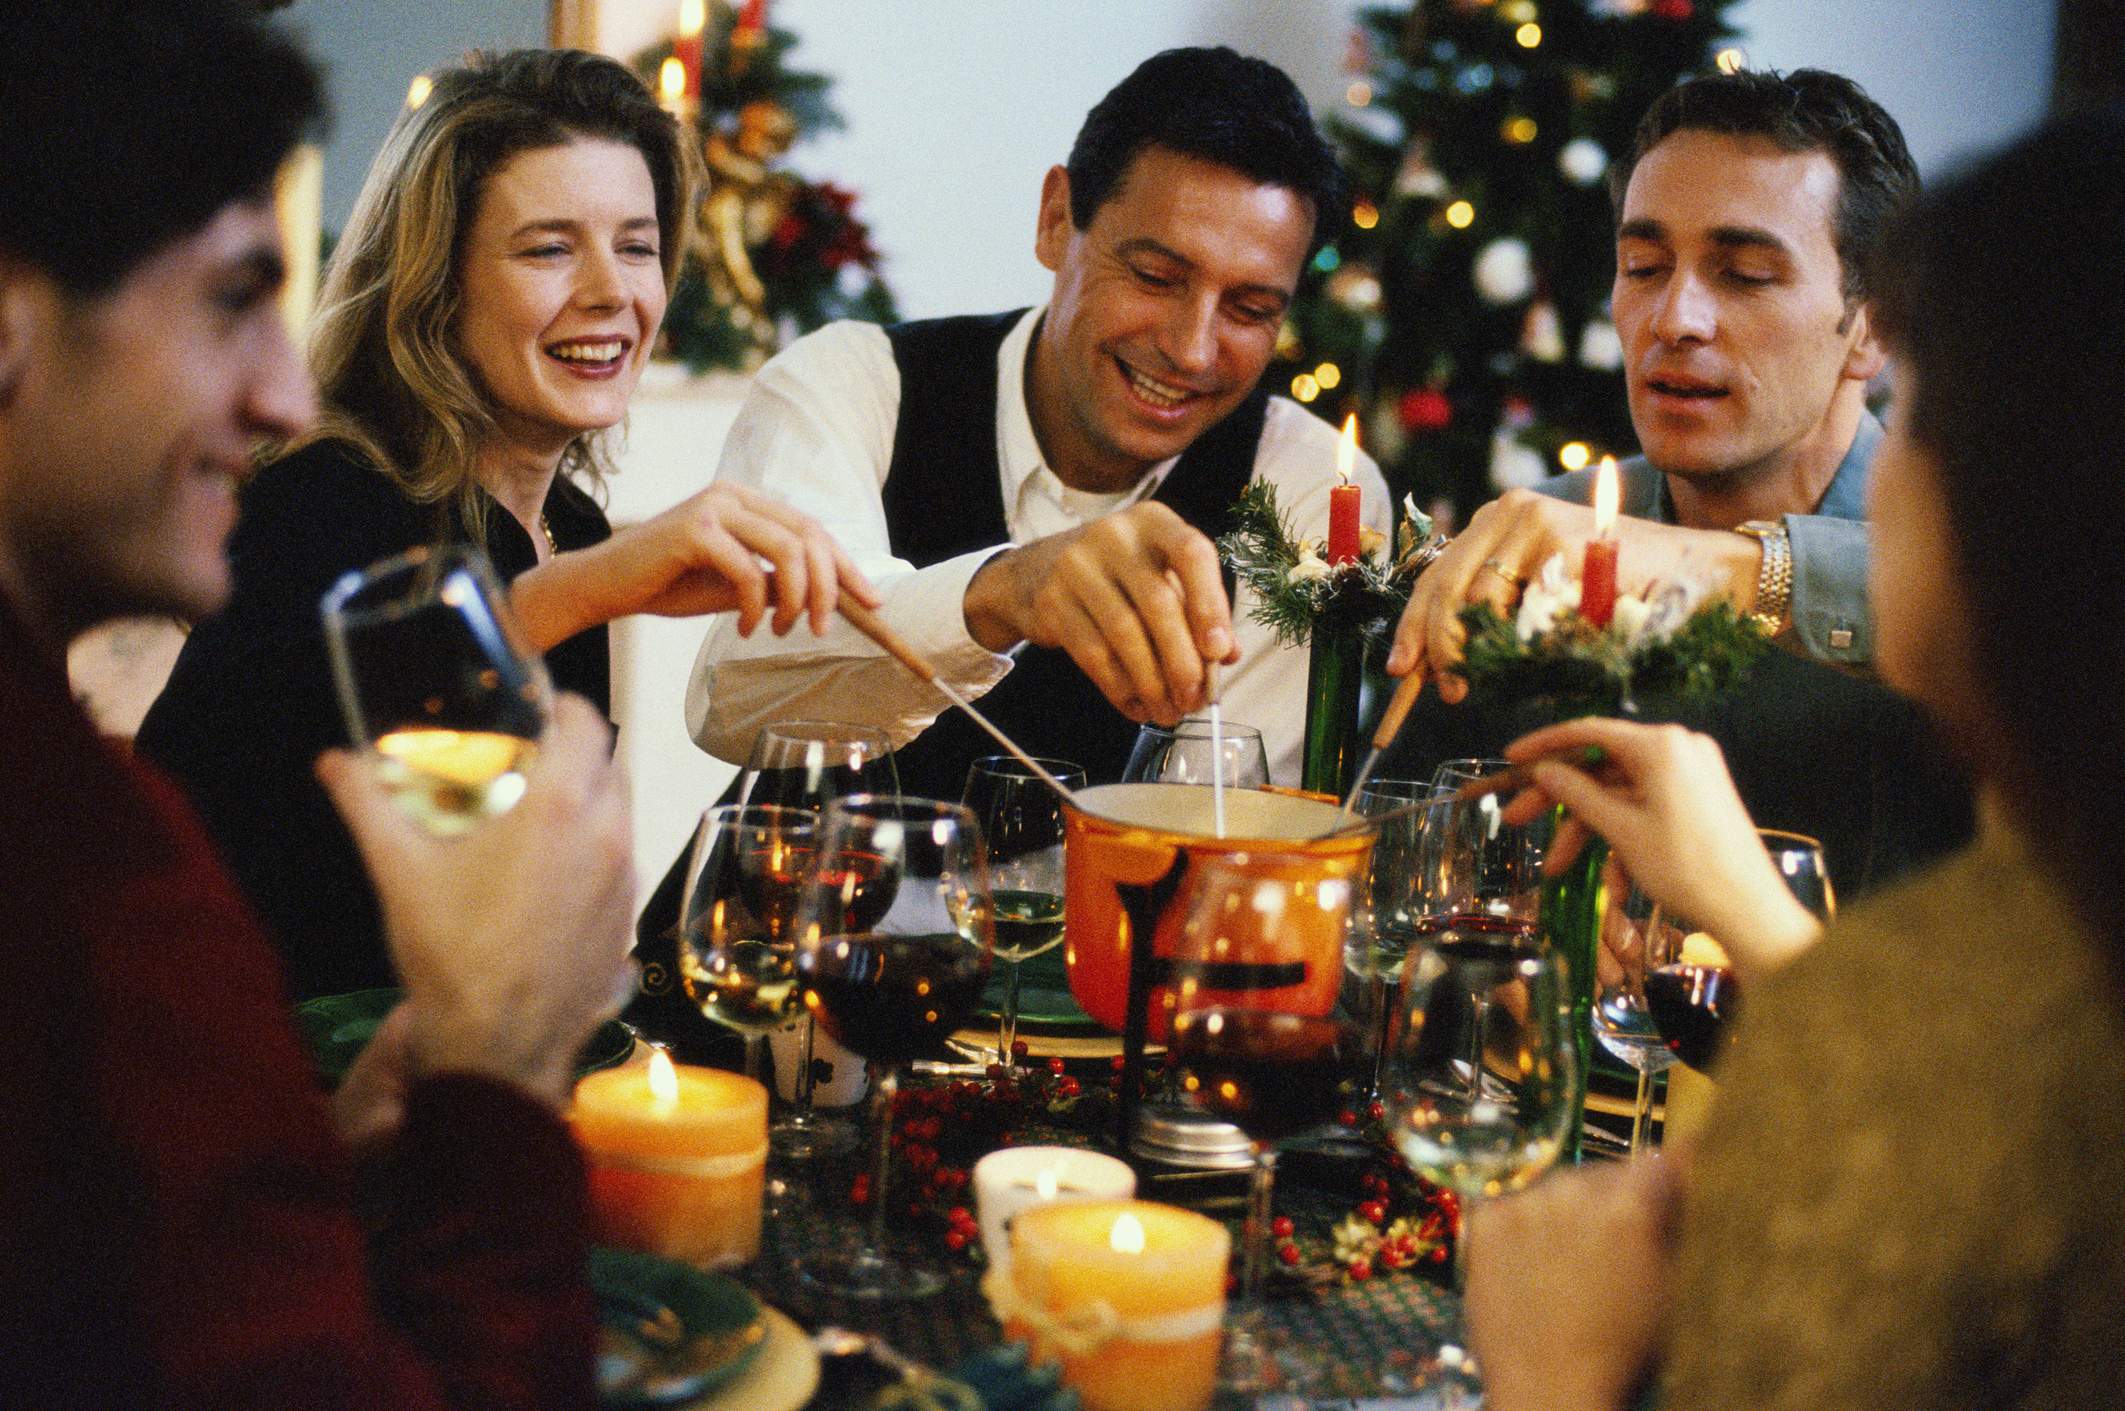 Image depicts six people sitting at a dining table. They are drinking a mix of wines and four of the people are eating the fondue in the middle of the table. There are lit candles strewn throughout. 